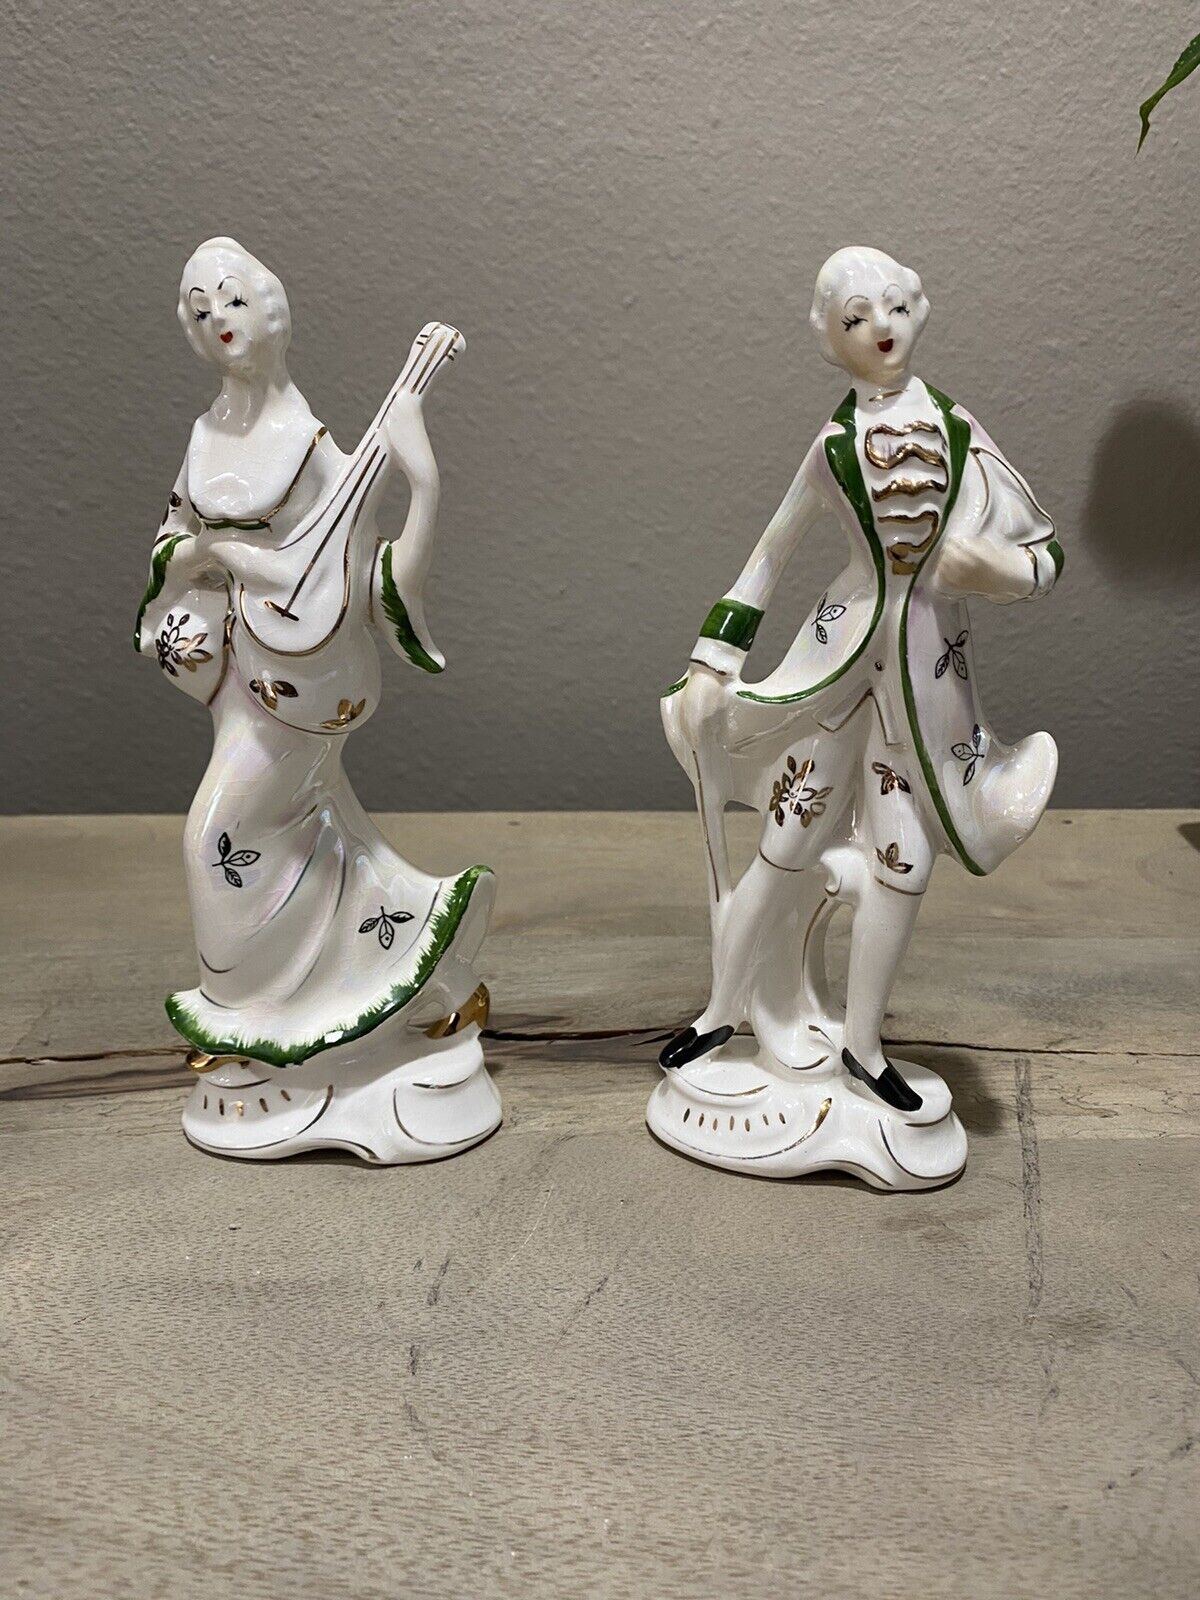 Pair OfVintage Brinnco Porcelain Figurines Japan White/Green with Gold Trim 7.5\